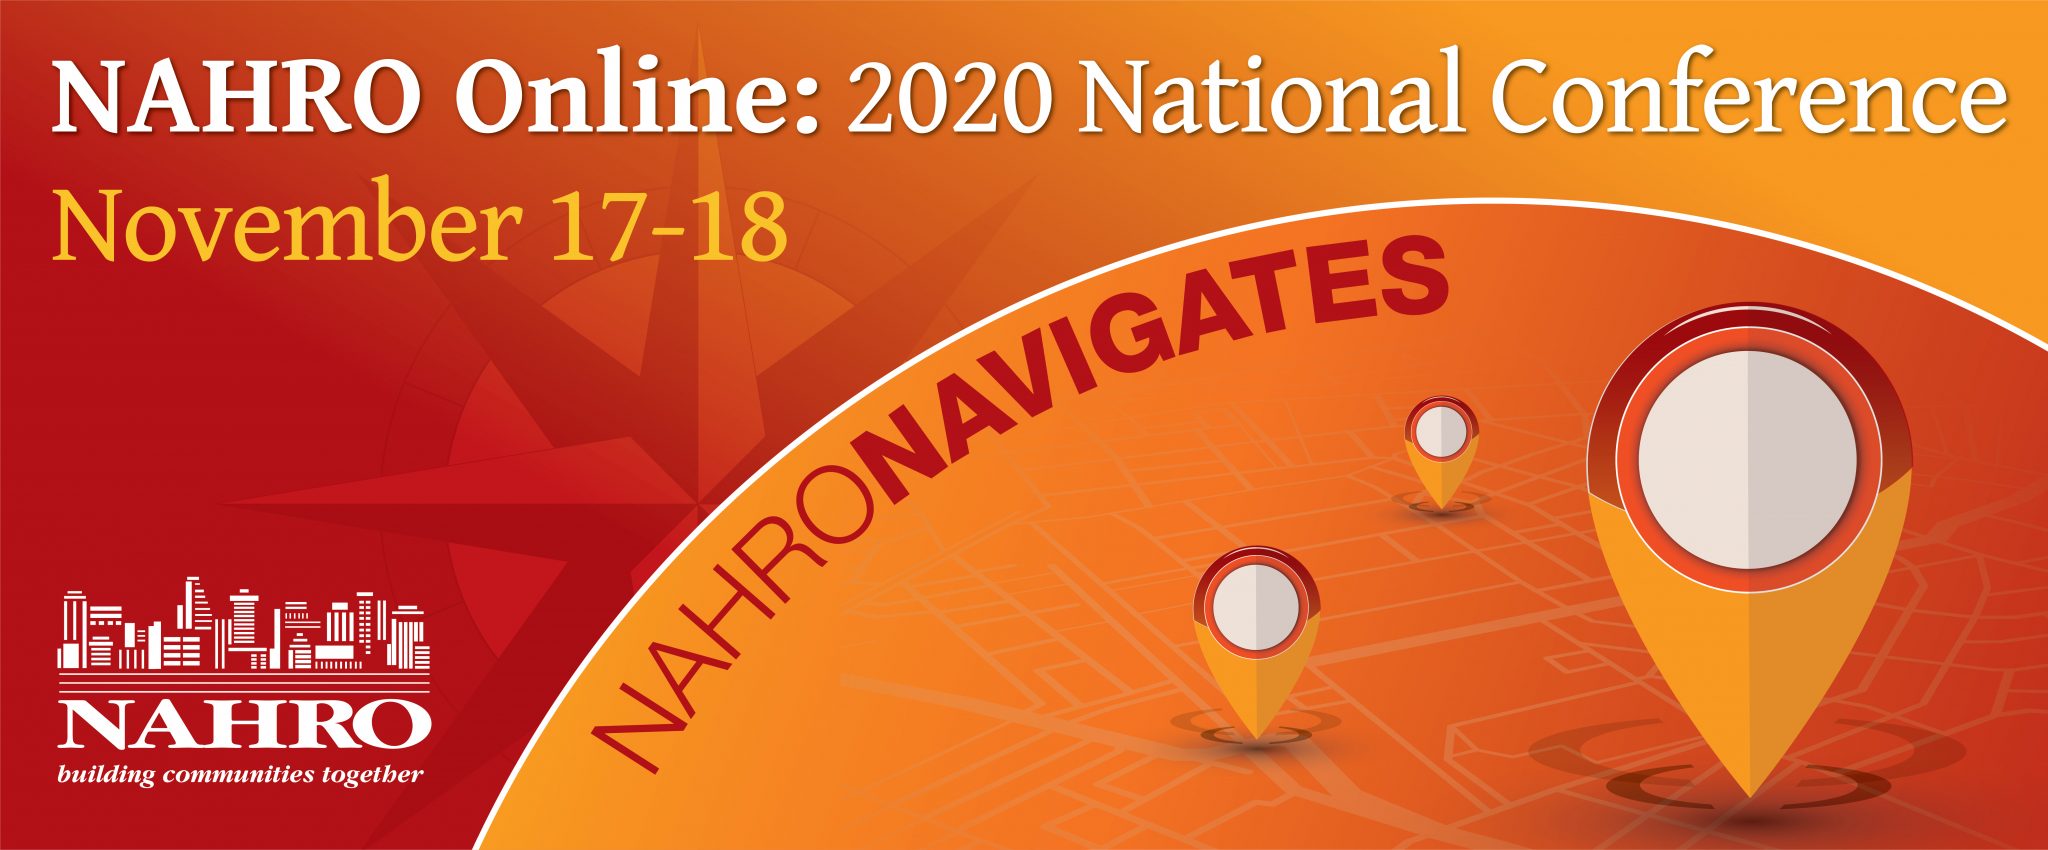 The National Conference Goes Online! The National Association of